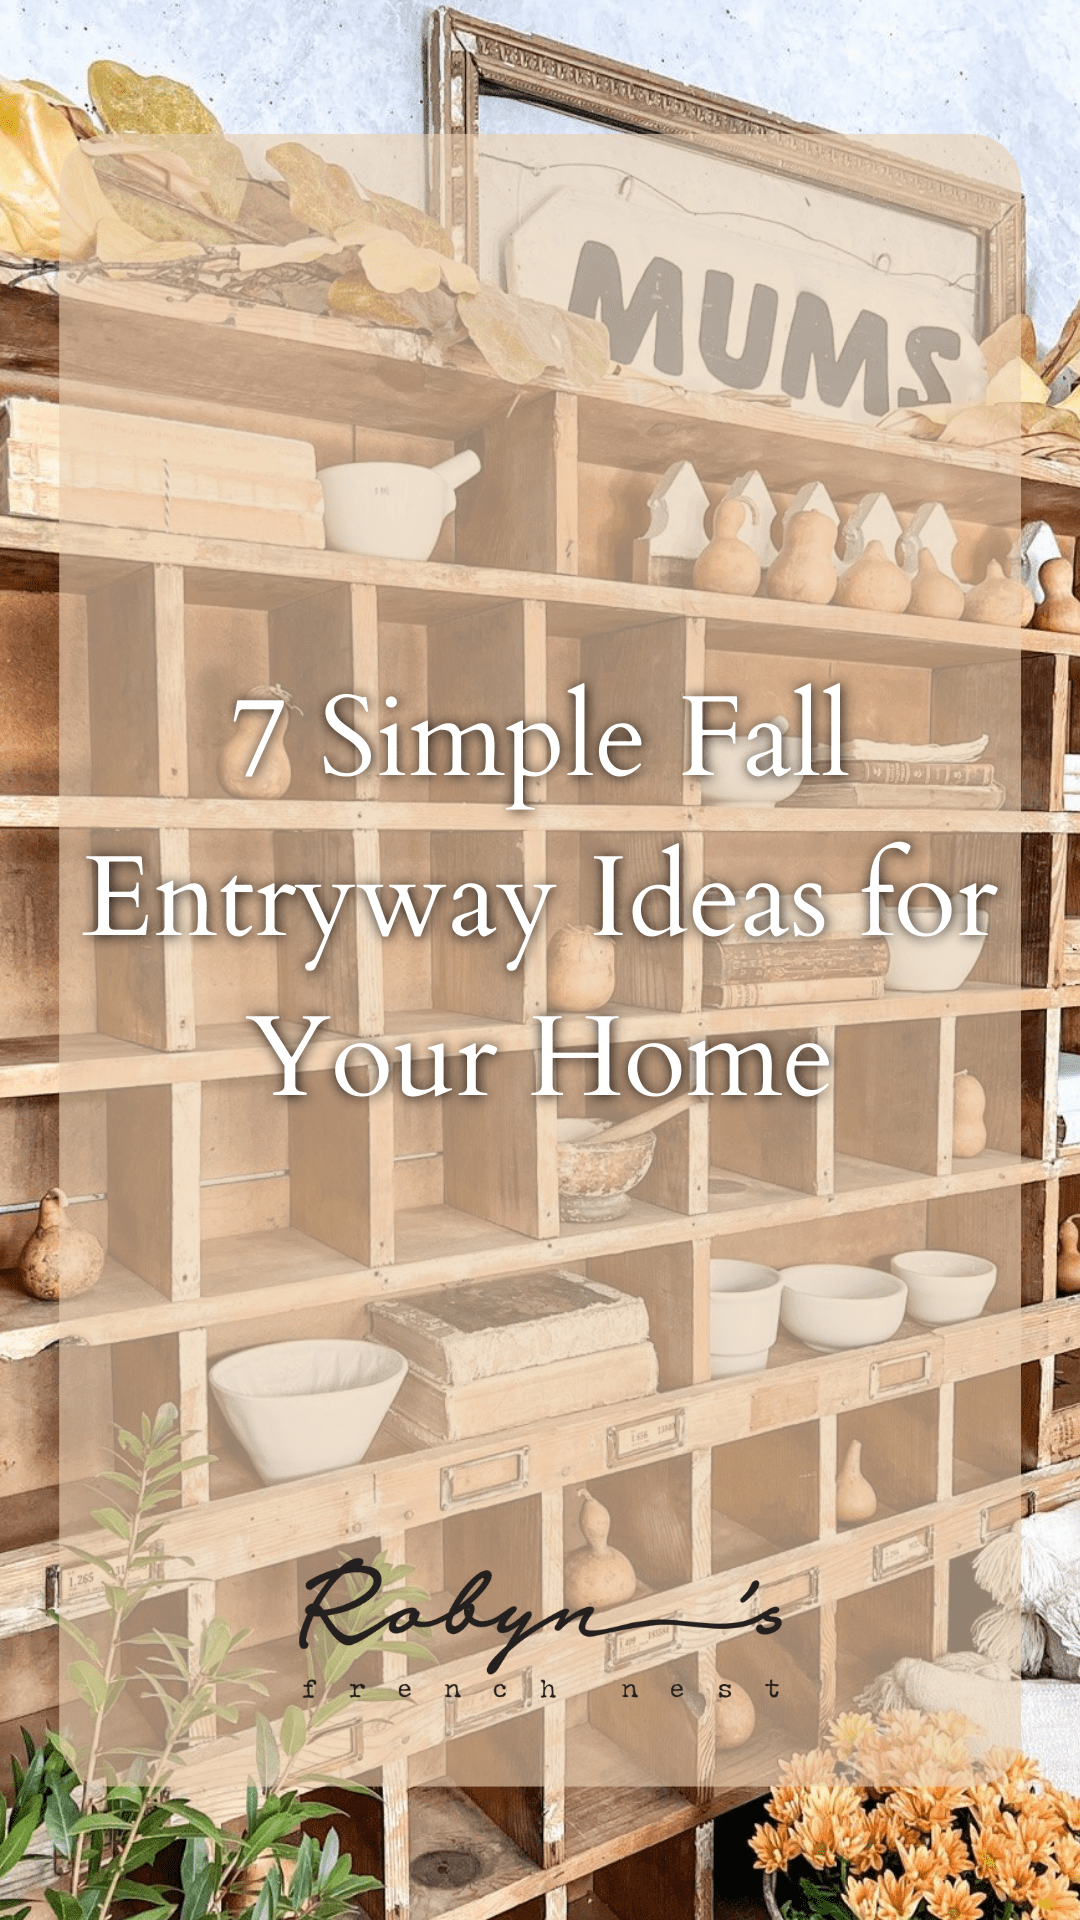 7 Simple Fall Entryway Decor Ideas for Your Home